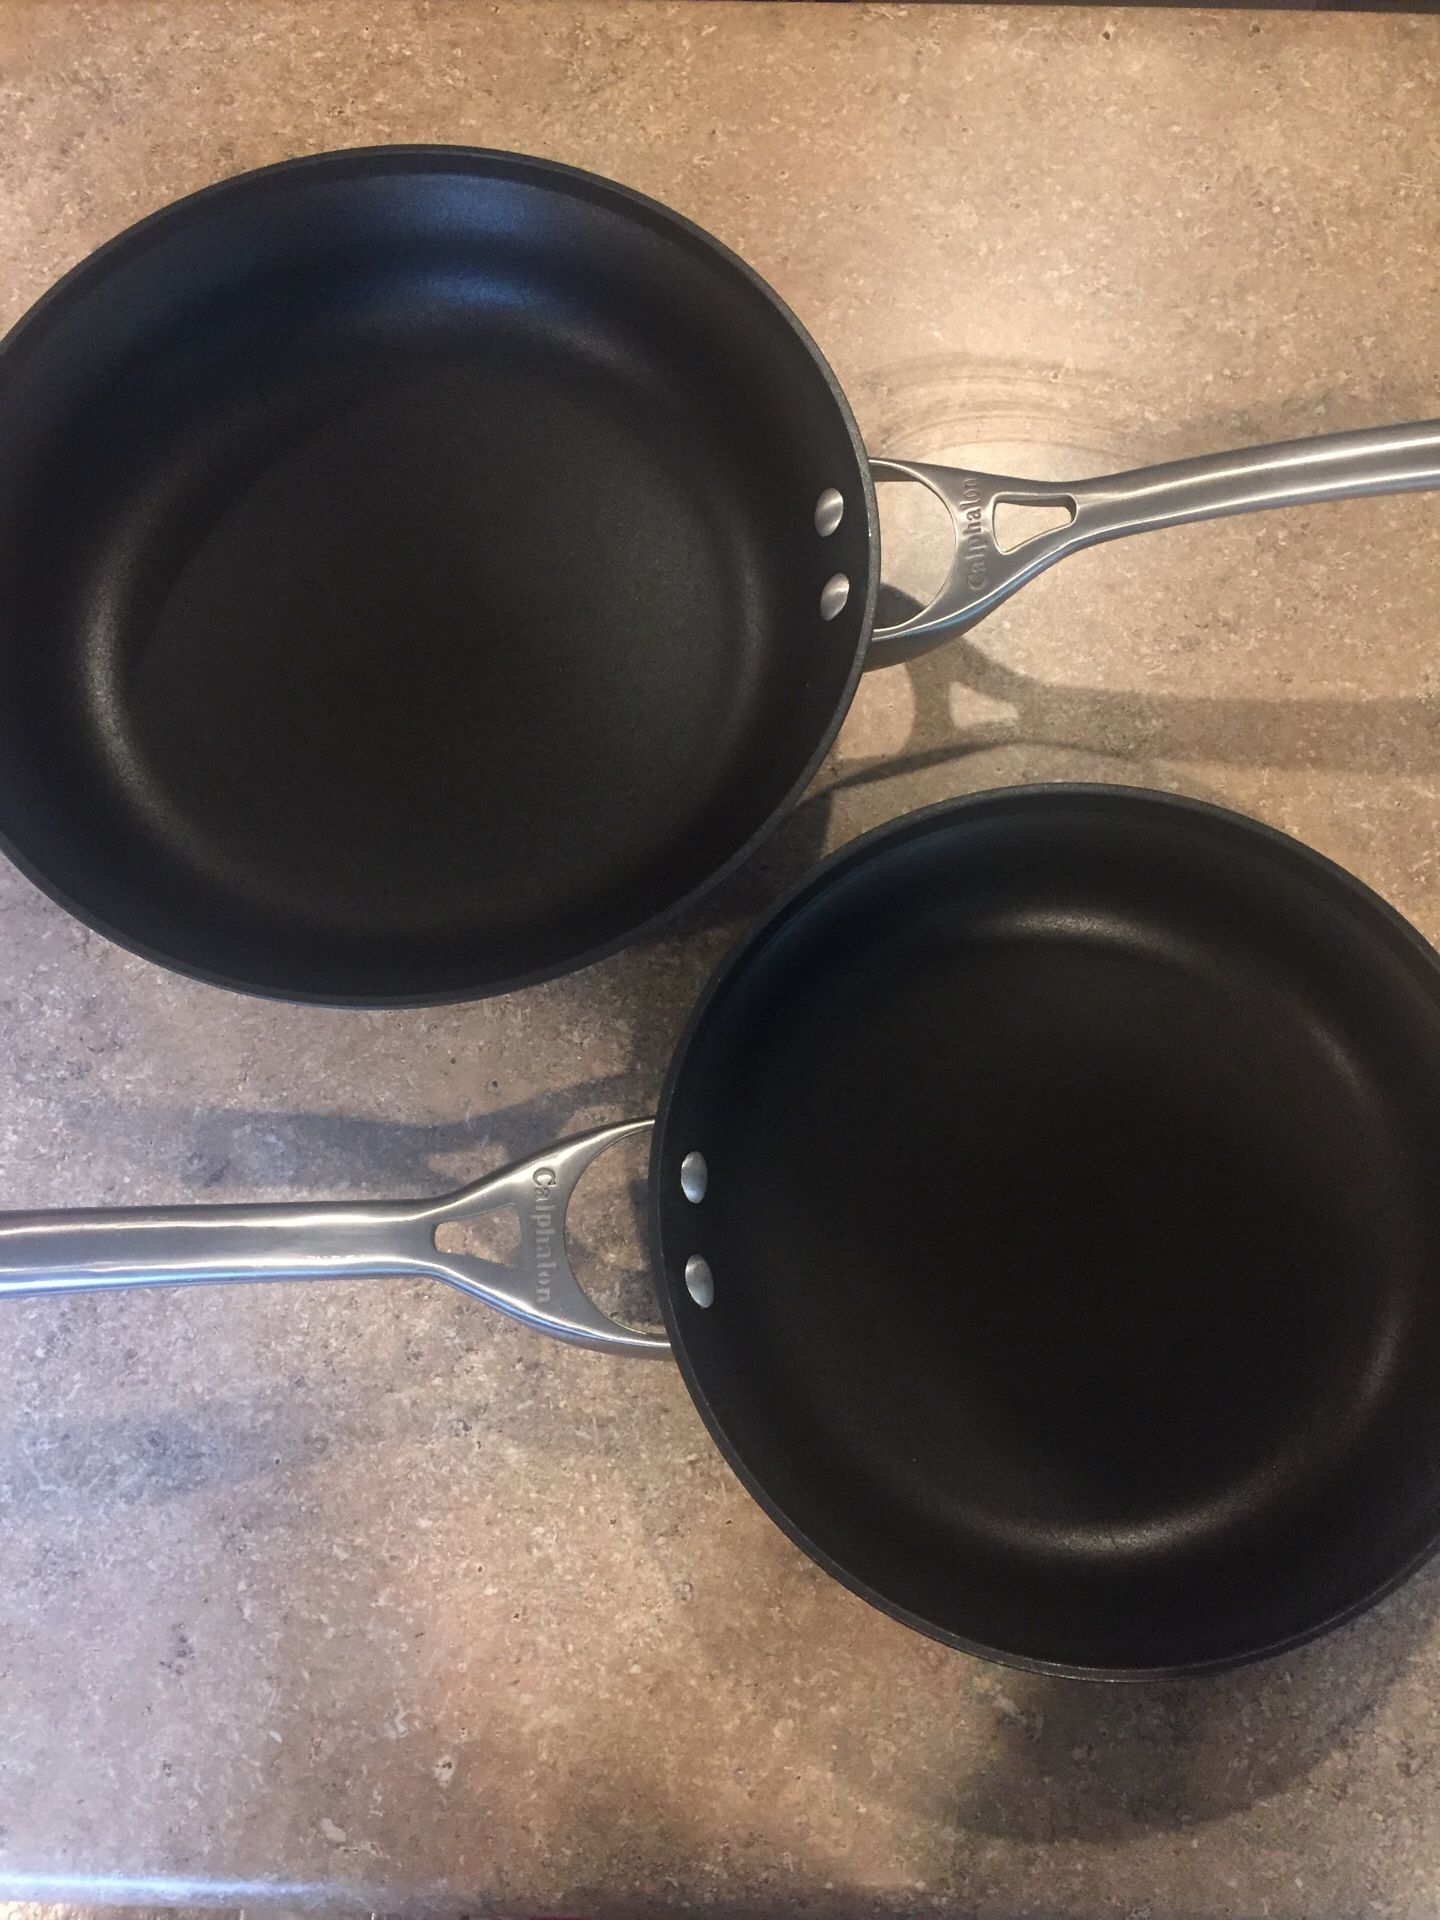 Used Calphalon pans - 12 and 10 inch